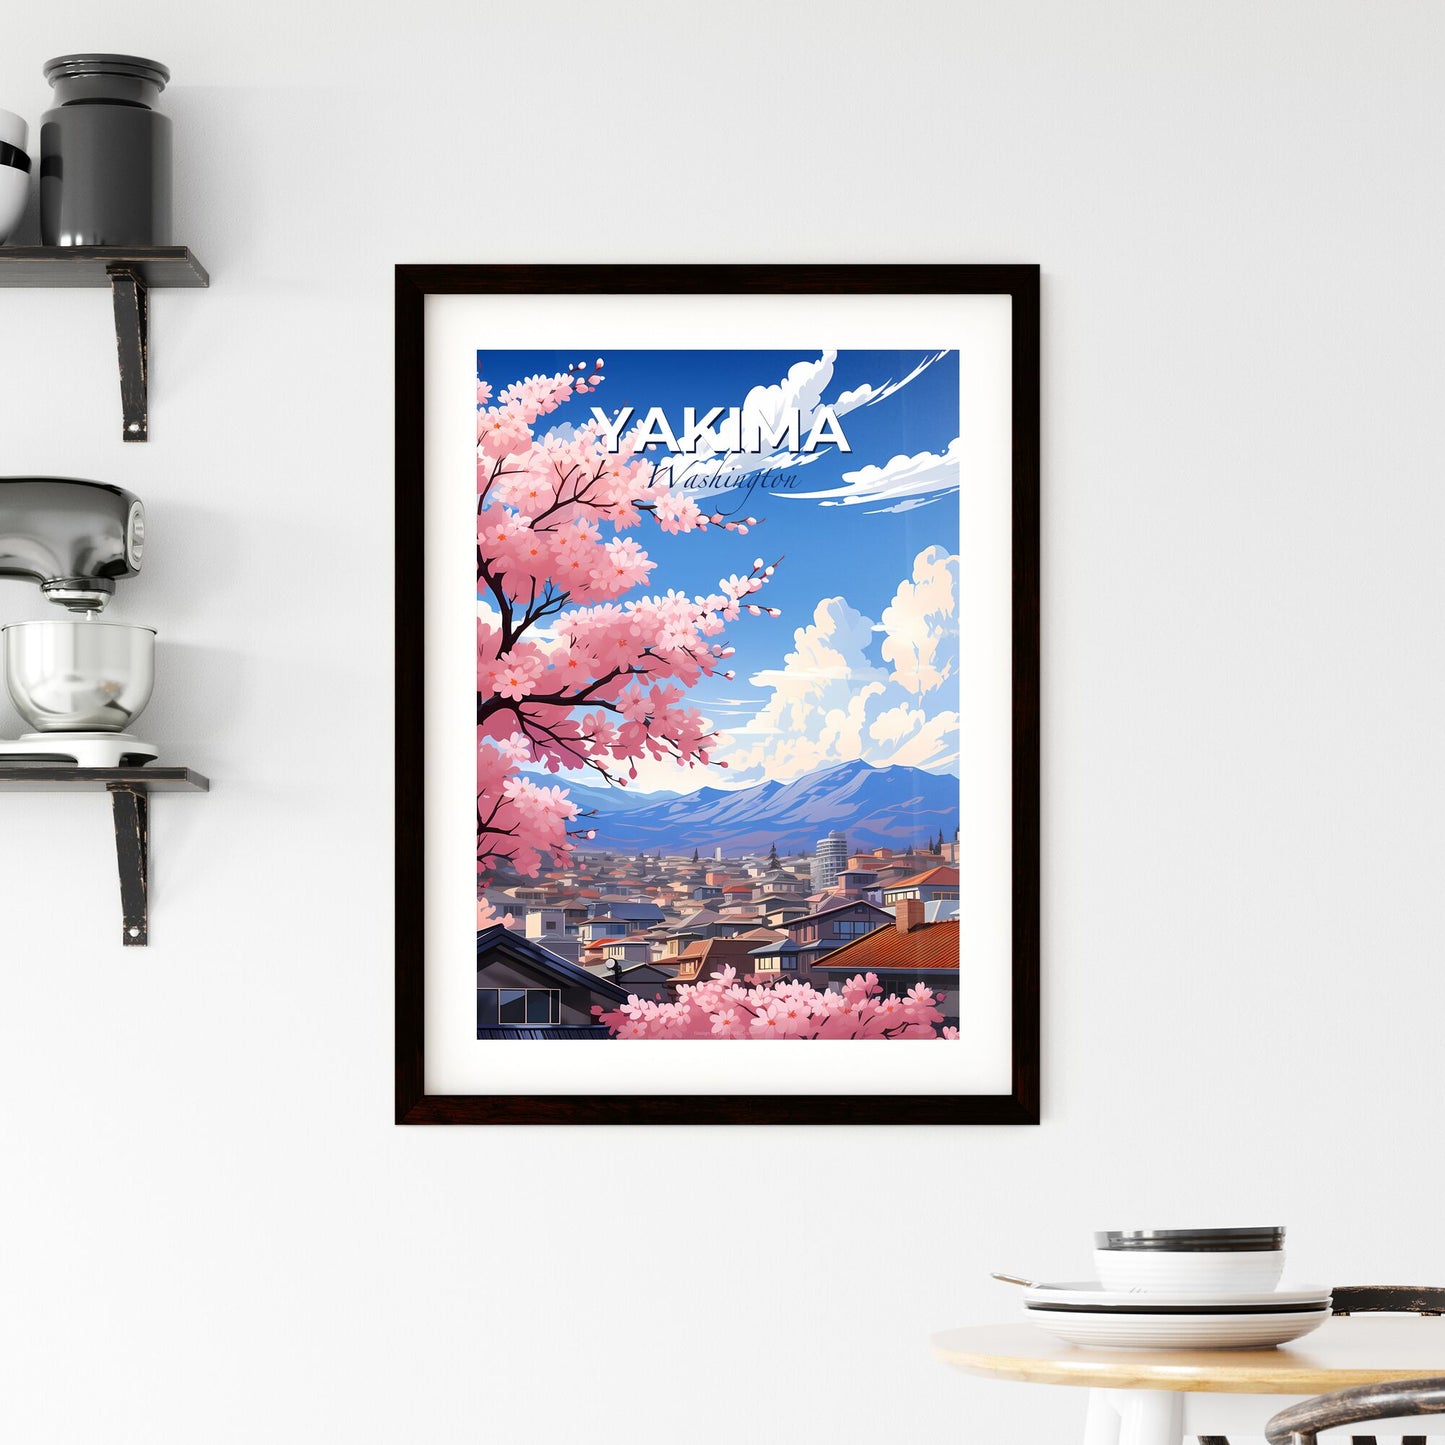 Yakima, Washington, A Poster of a pink tree with flowers in front of a city Default Title